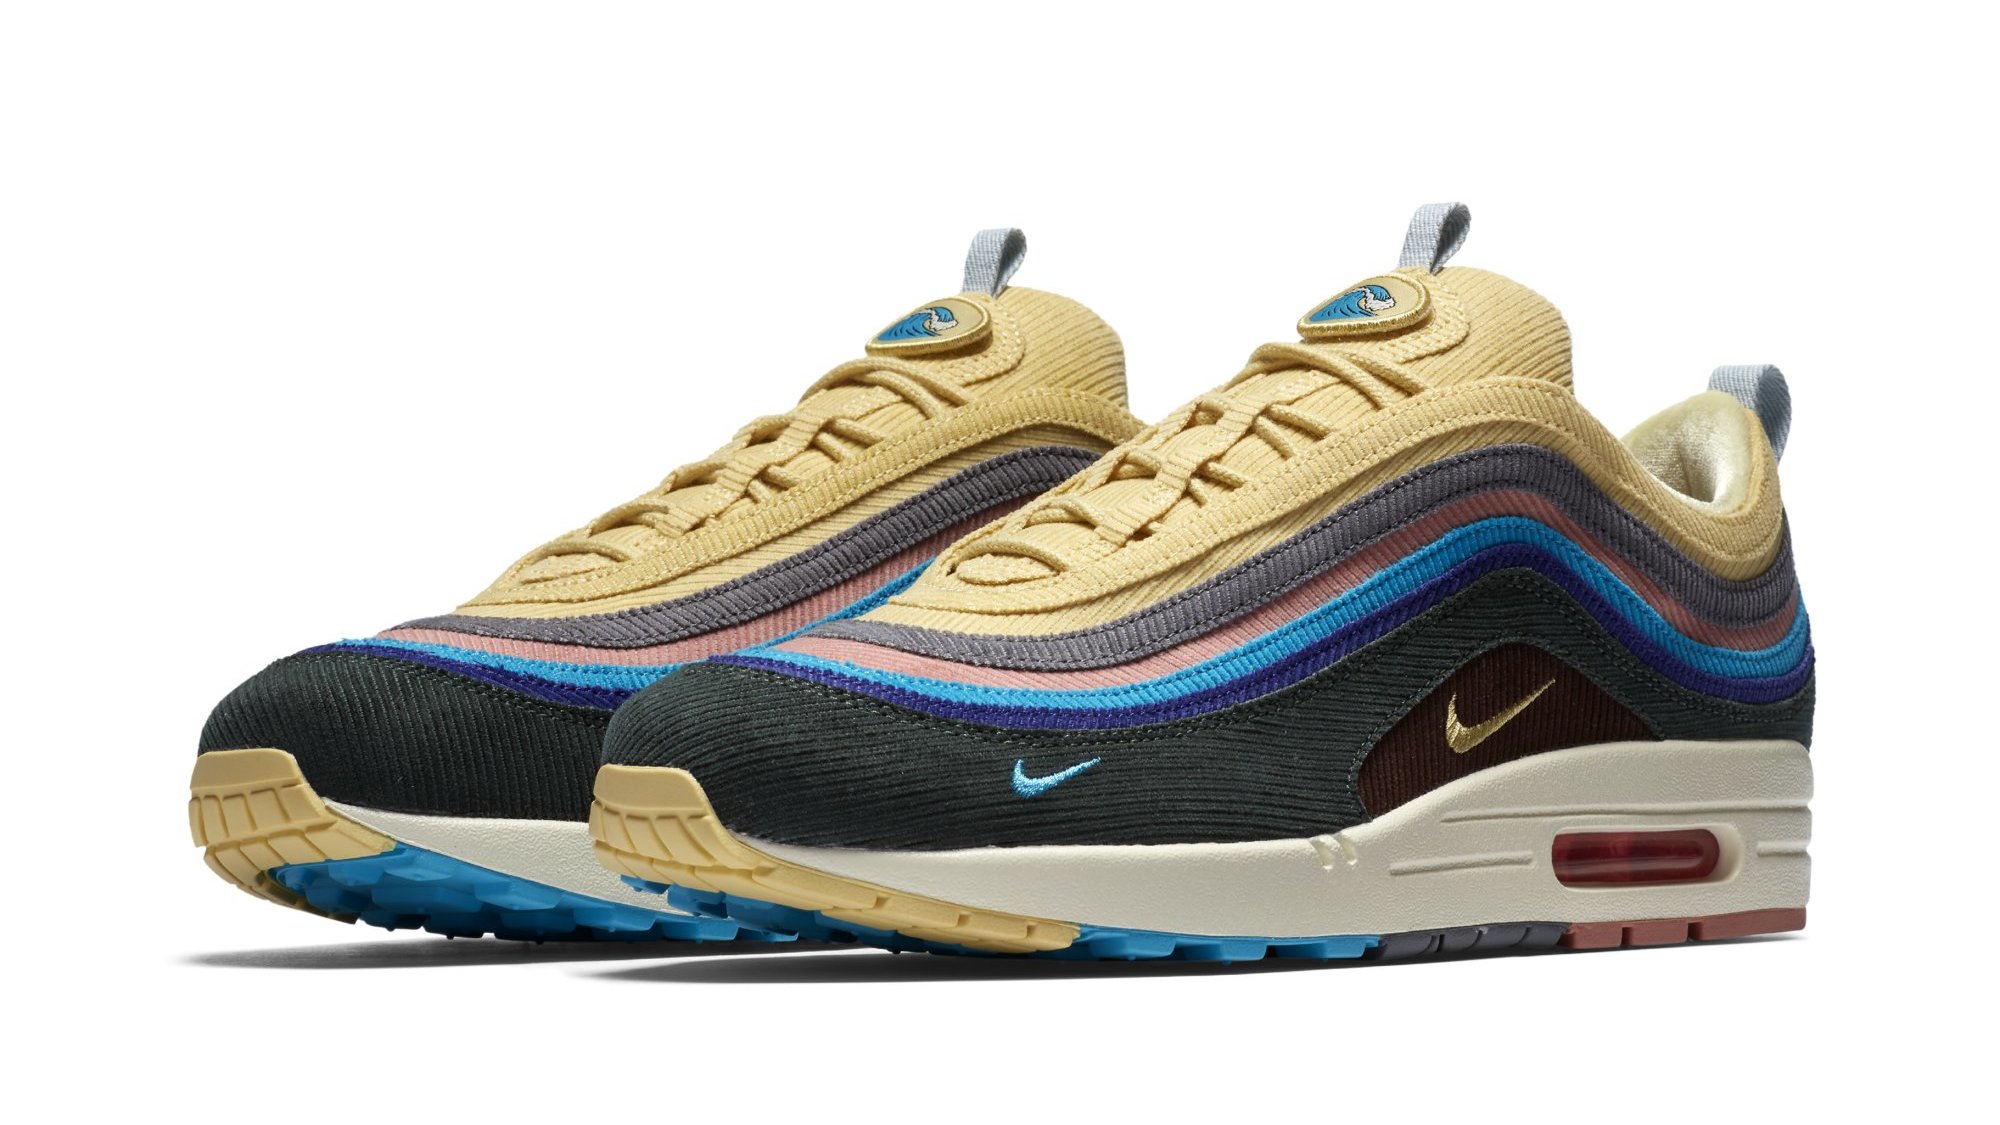 Sean Wotherspoon x Nike Air Max 1/97 End. Clothing Restock | Sole Collector